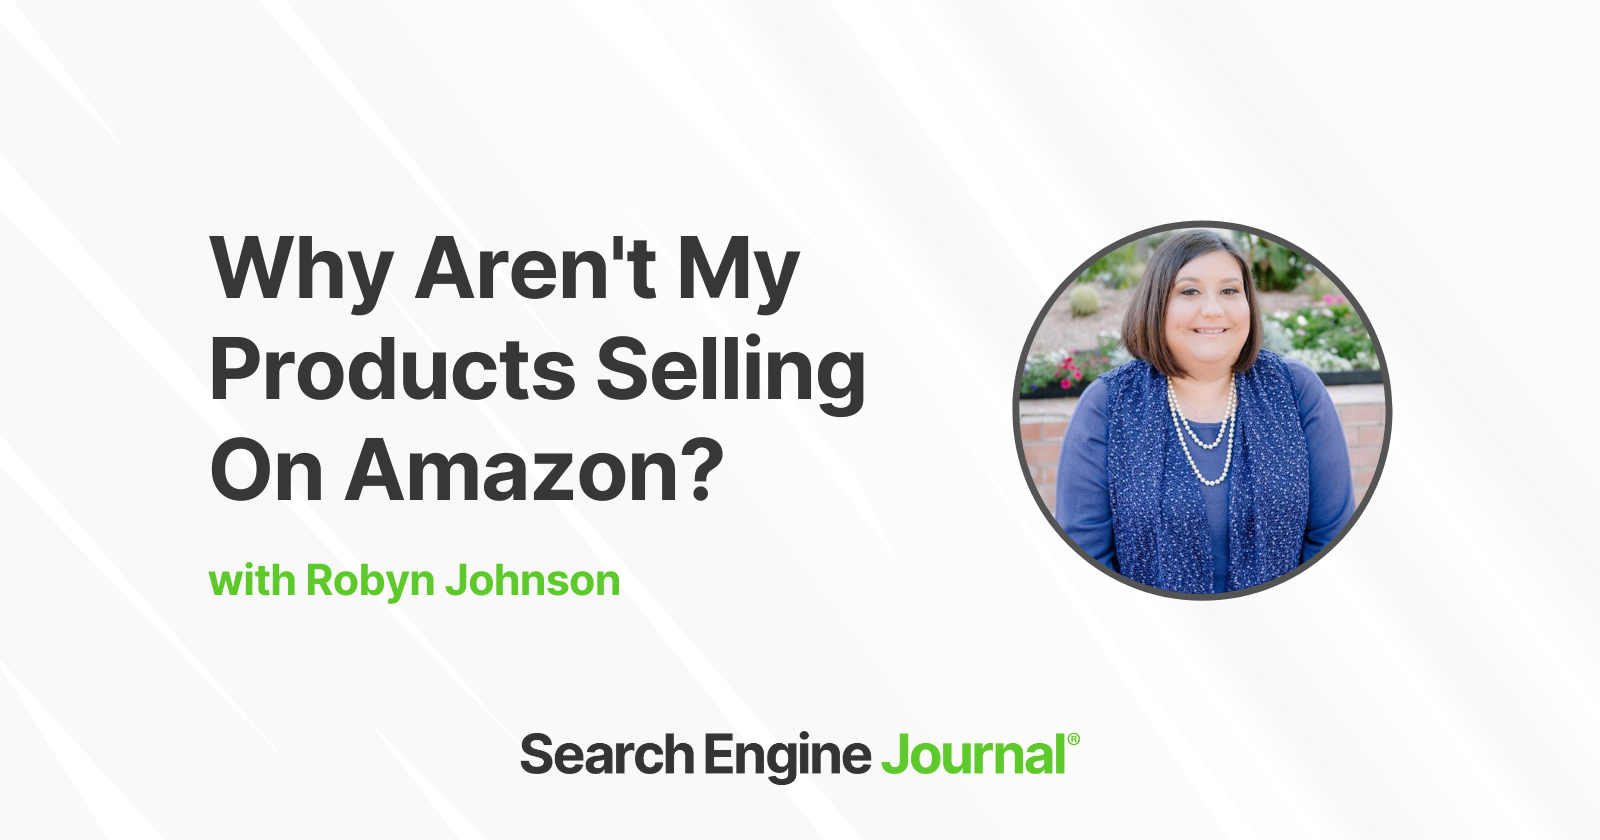 Why Aren't My Products Selling on Amazon? - Search Engine Journal